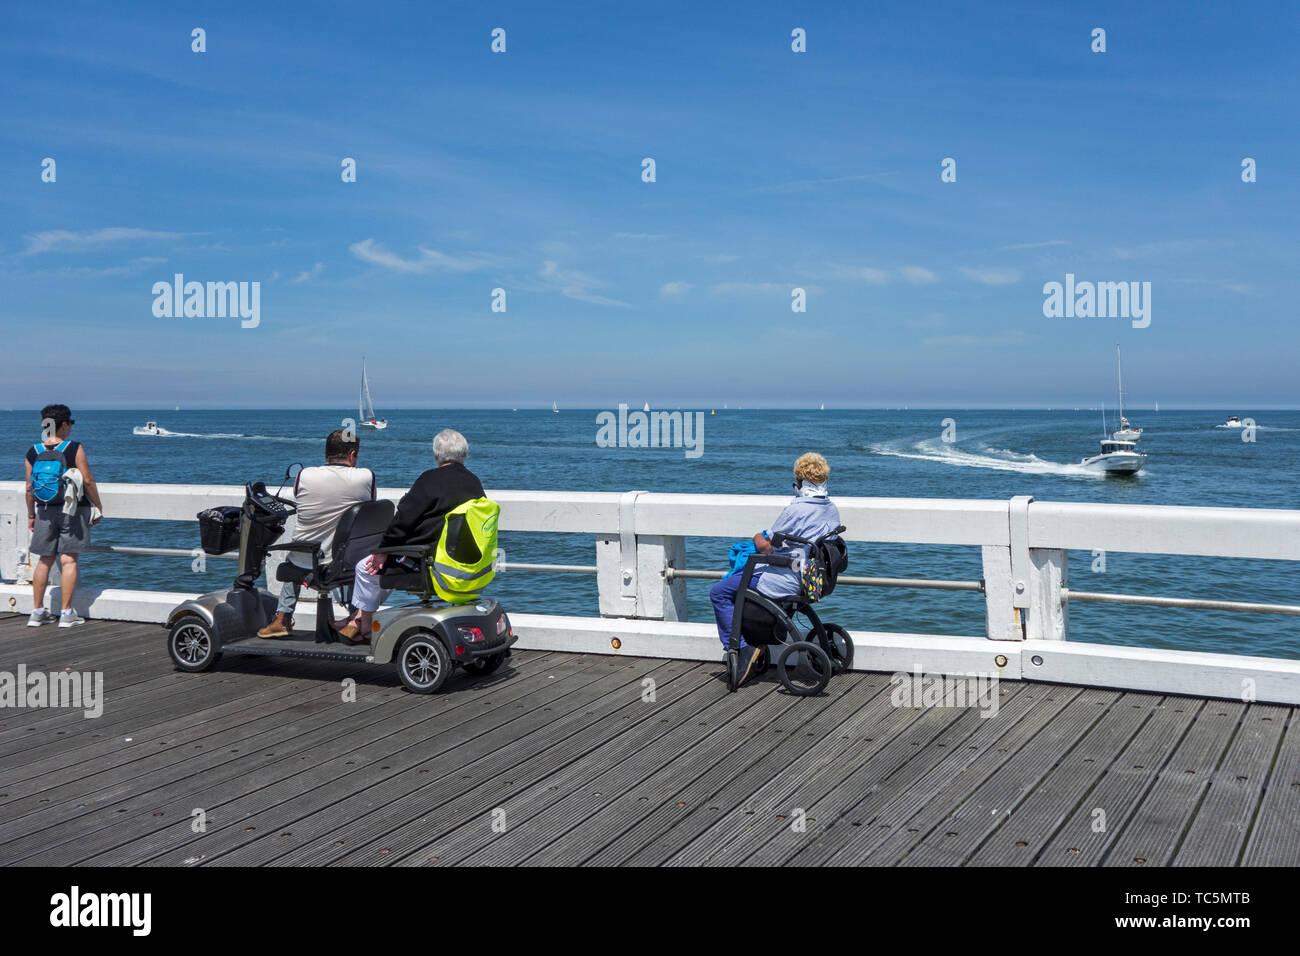 Disabled woman in wheelchair and handicapped persons in duo two person mobility scooter watching boats at sea from jetty Stock Photo